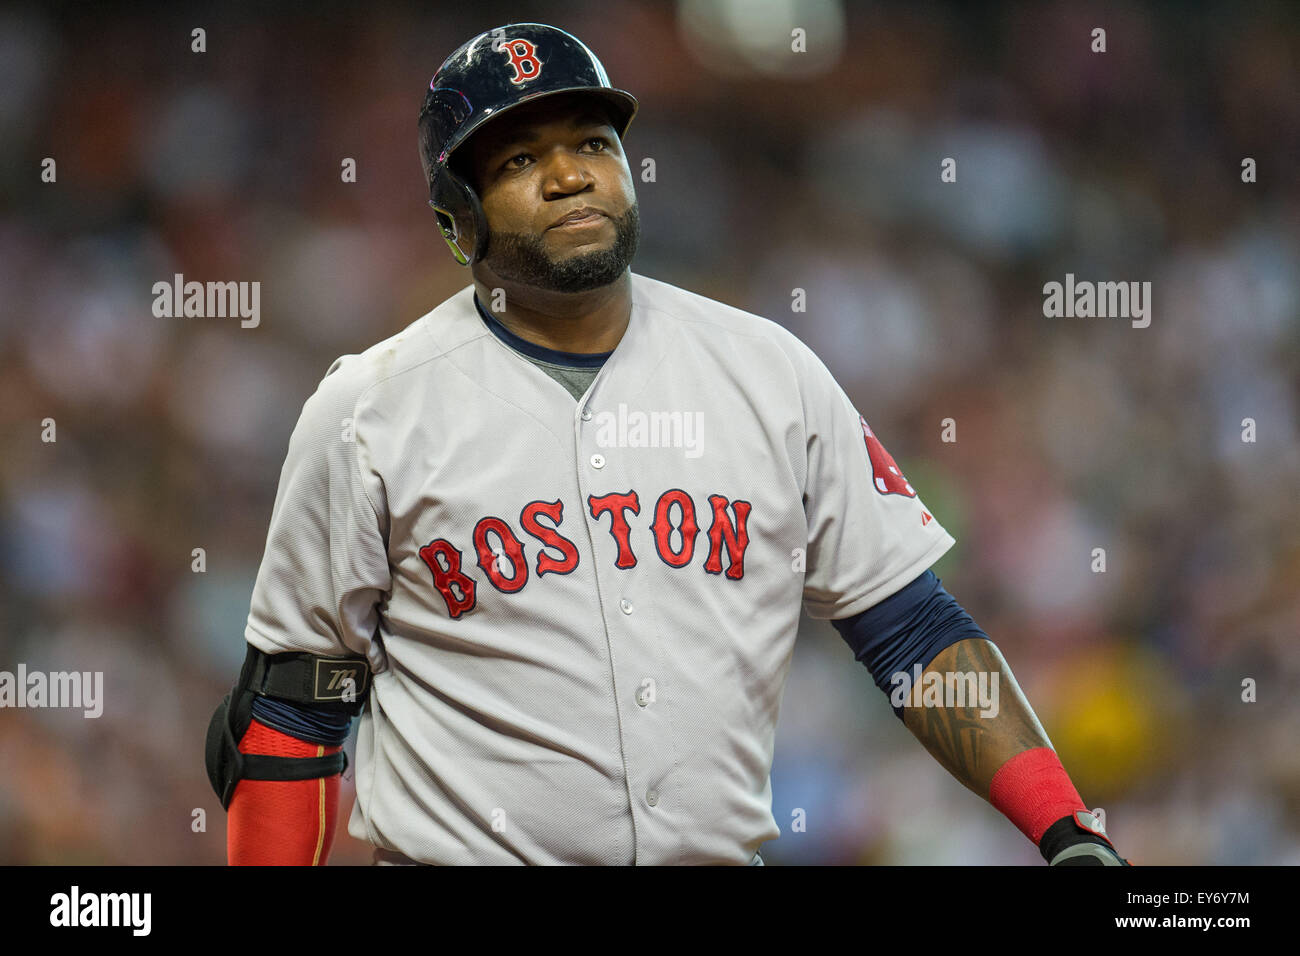 Houston, TX, USA. 22nd July, 2015. Boston Red Sox designated hitter David Ortiz (34) bats during the 4th inning of a Major League Baseball game between the Houston Astros and the Boston Red Sox at Minute Maid Park in Houston, TX. Trask Smith/CSM/Alamy Live News Stock Photo